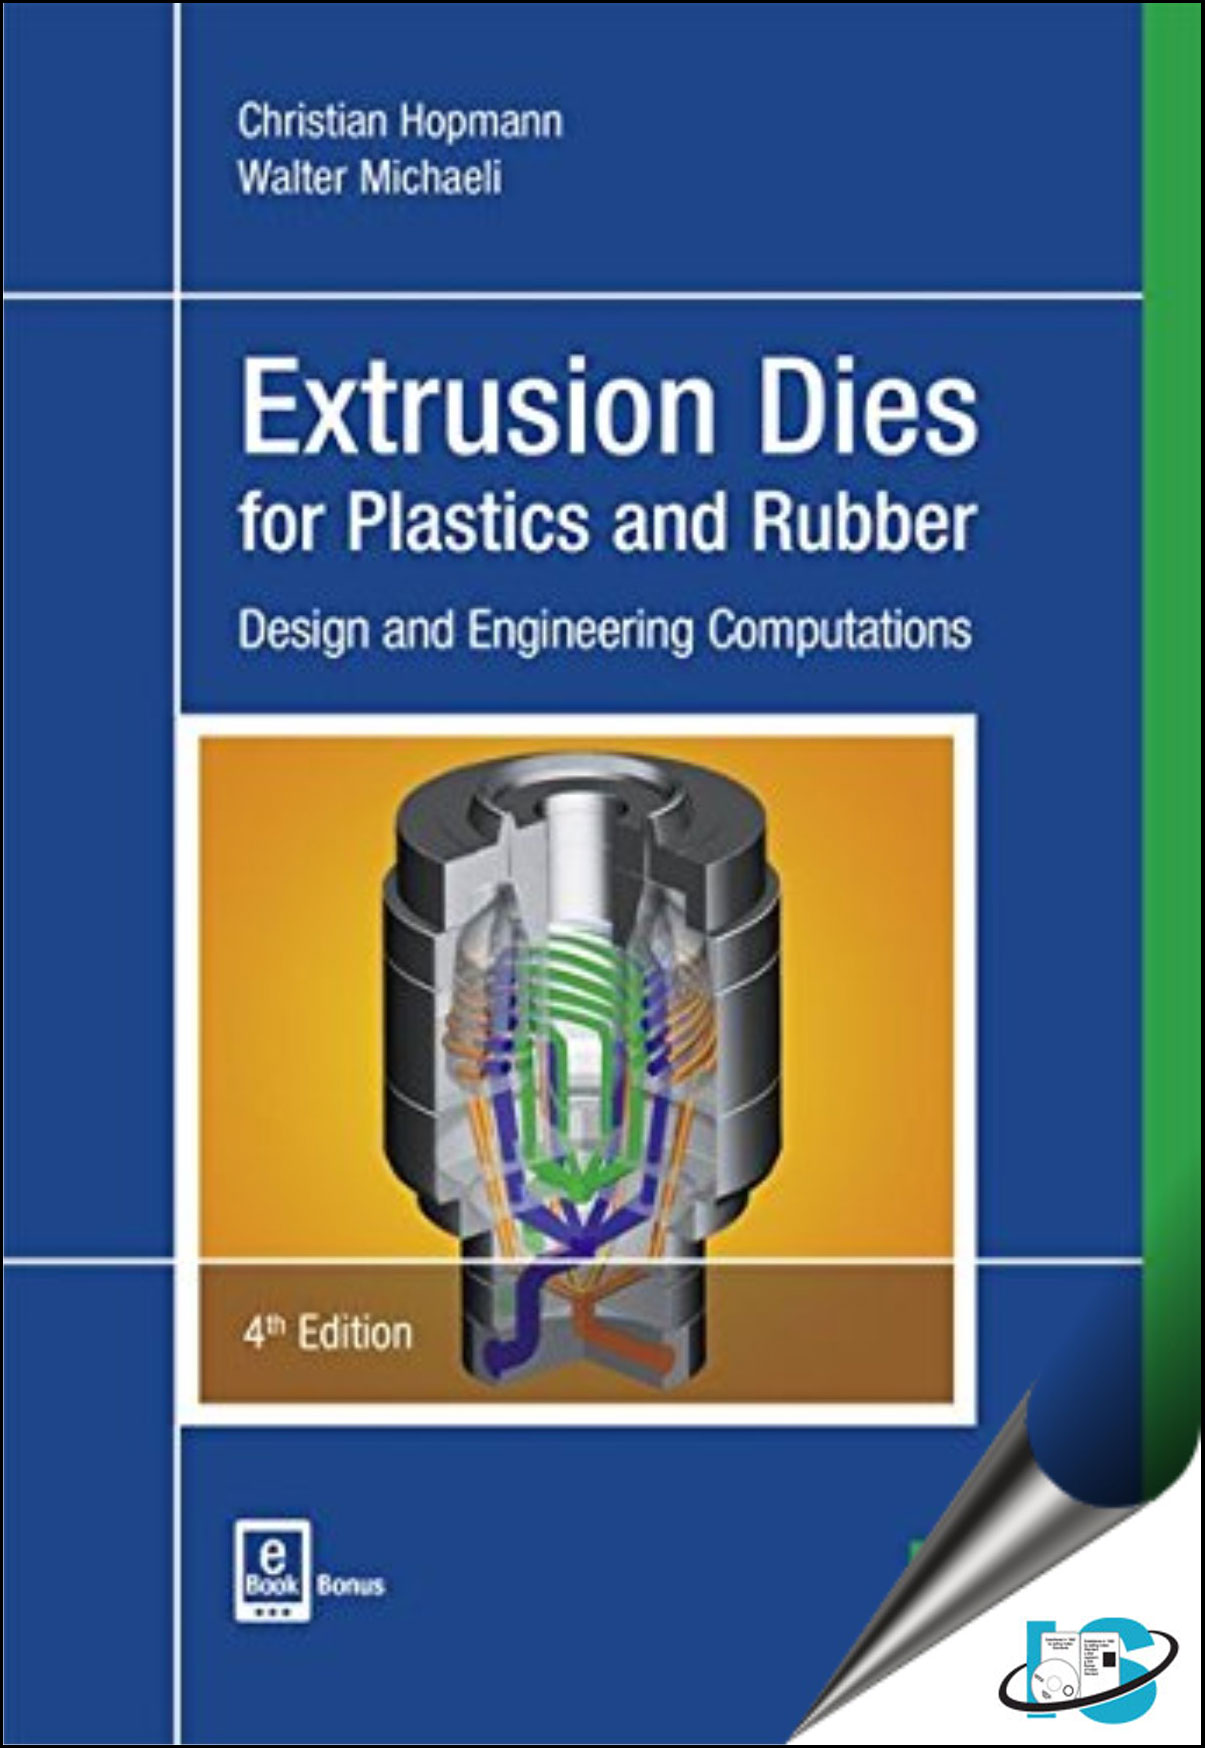 Extrusion Dies For Plastics And Rubber Design Engineering Computations
Spe Books